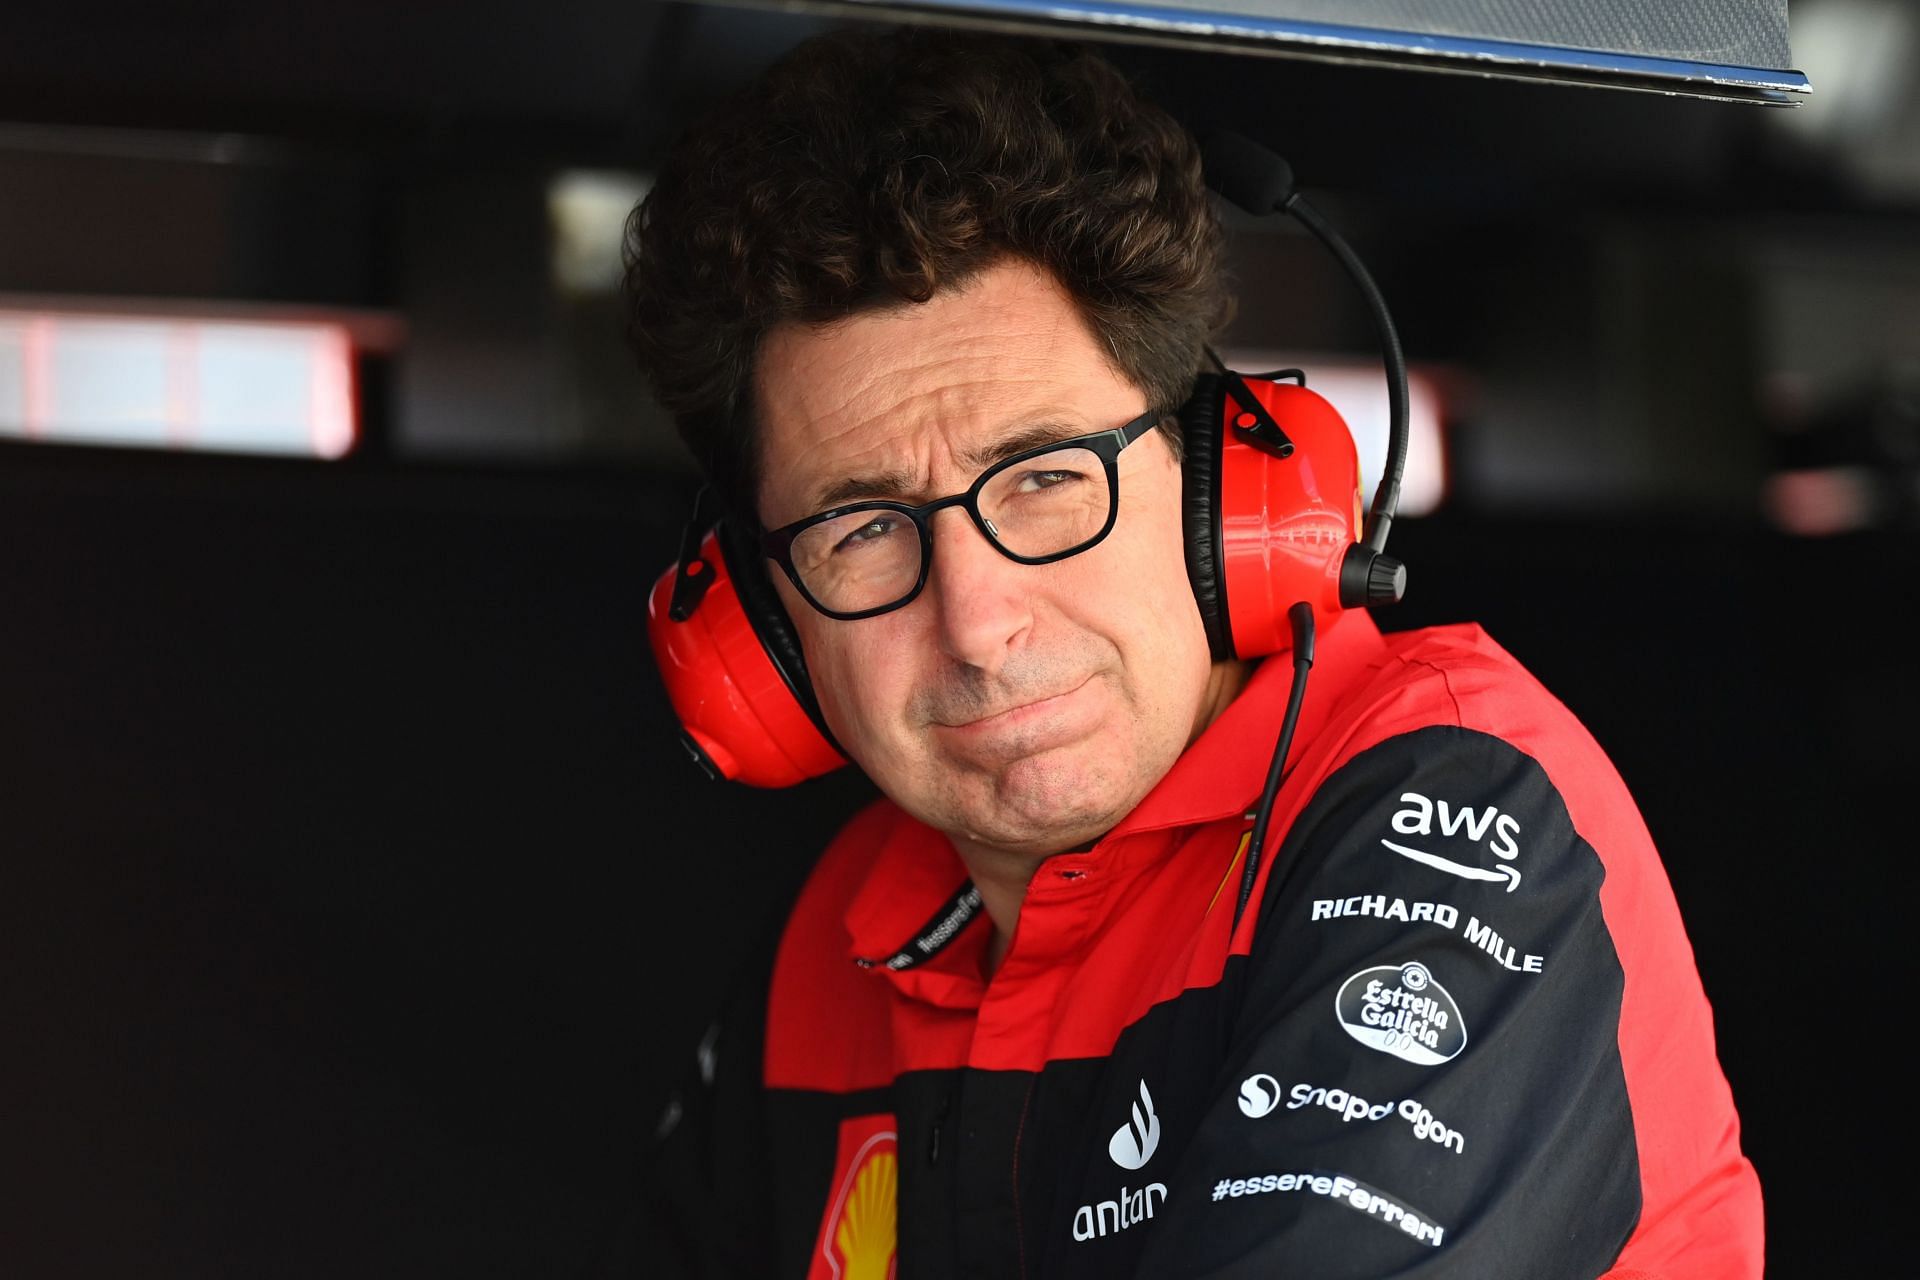 Mattia Binotto looks on from the pitlane during practice ahead of the F1 Grand Prix of Canada at Circuit Gilles Villeneuve on June 17, 2022 in Montreal, Quebec. (Photo by Dan Mullan/Getty Images)